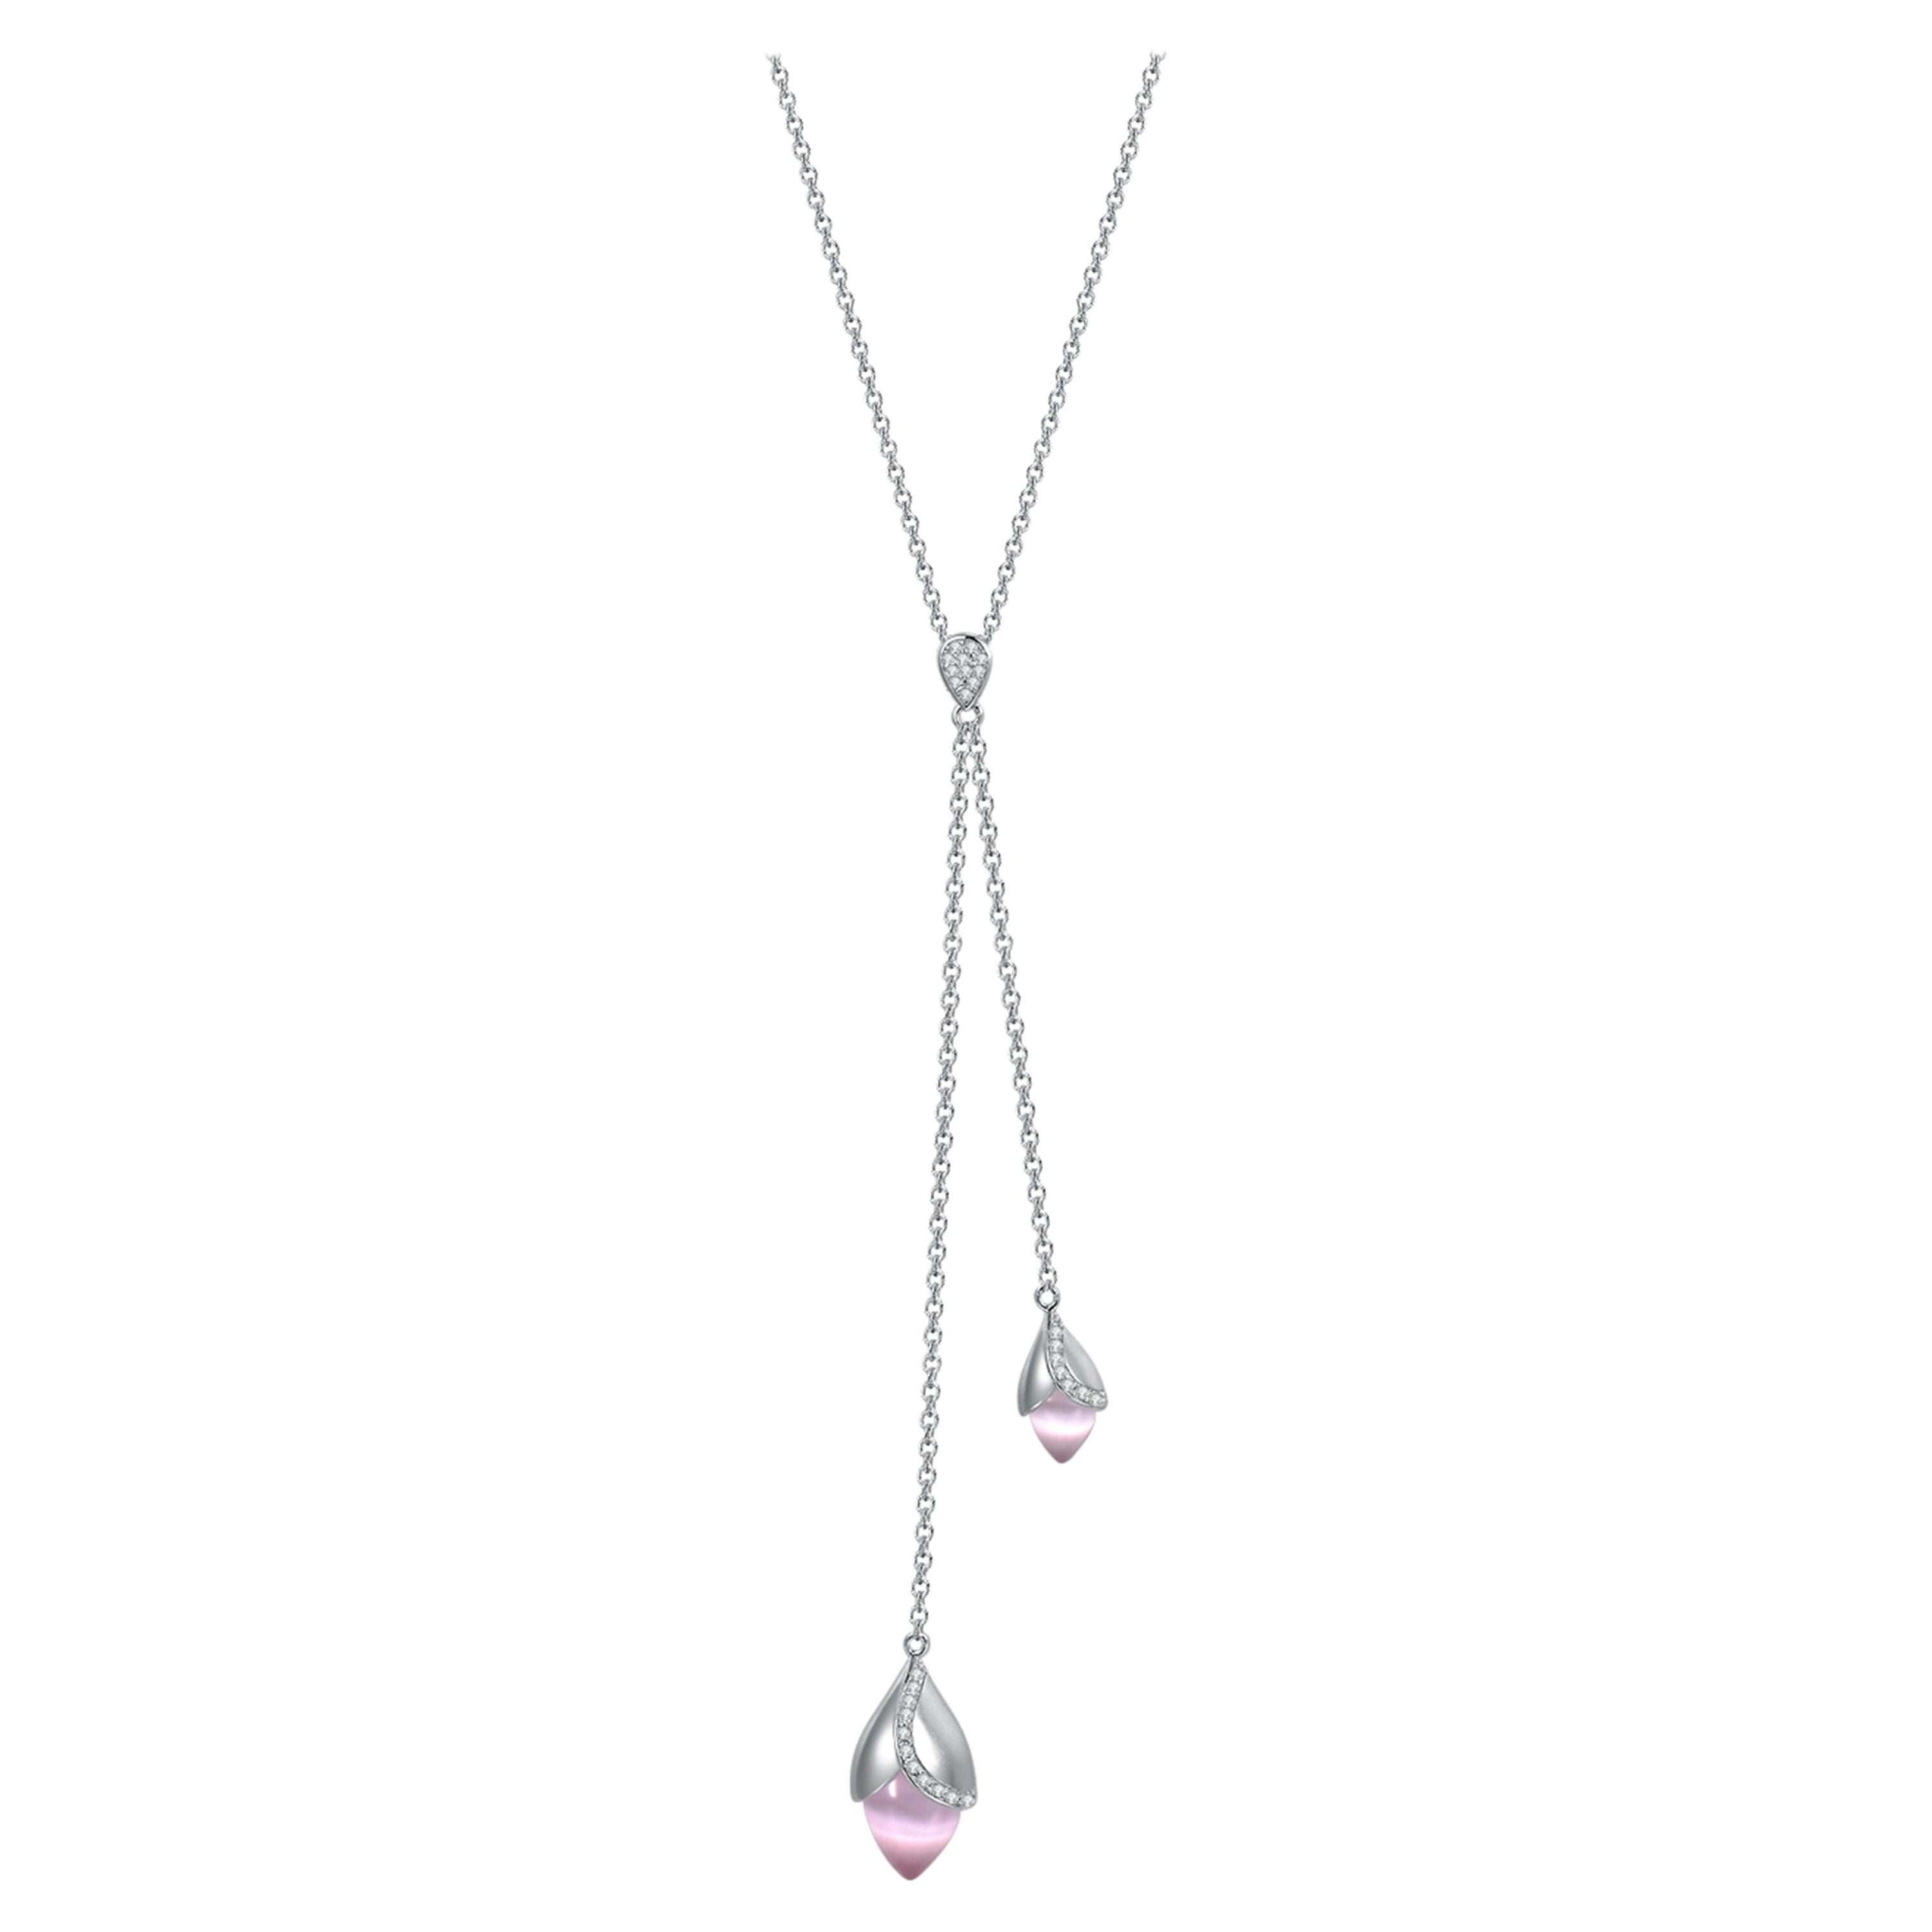 Fei Liu Pink Cat's Eyes Stone Cubic Zirconia Sterling Silver Lariat Necklace